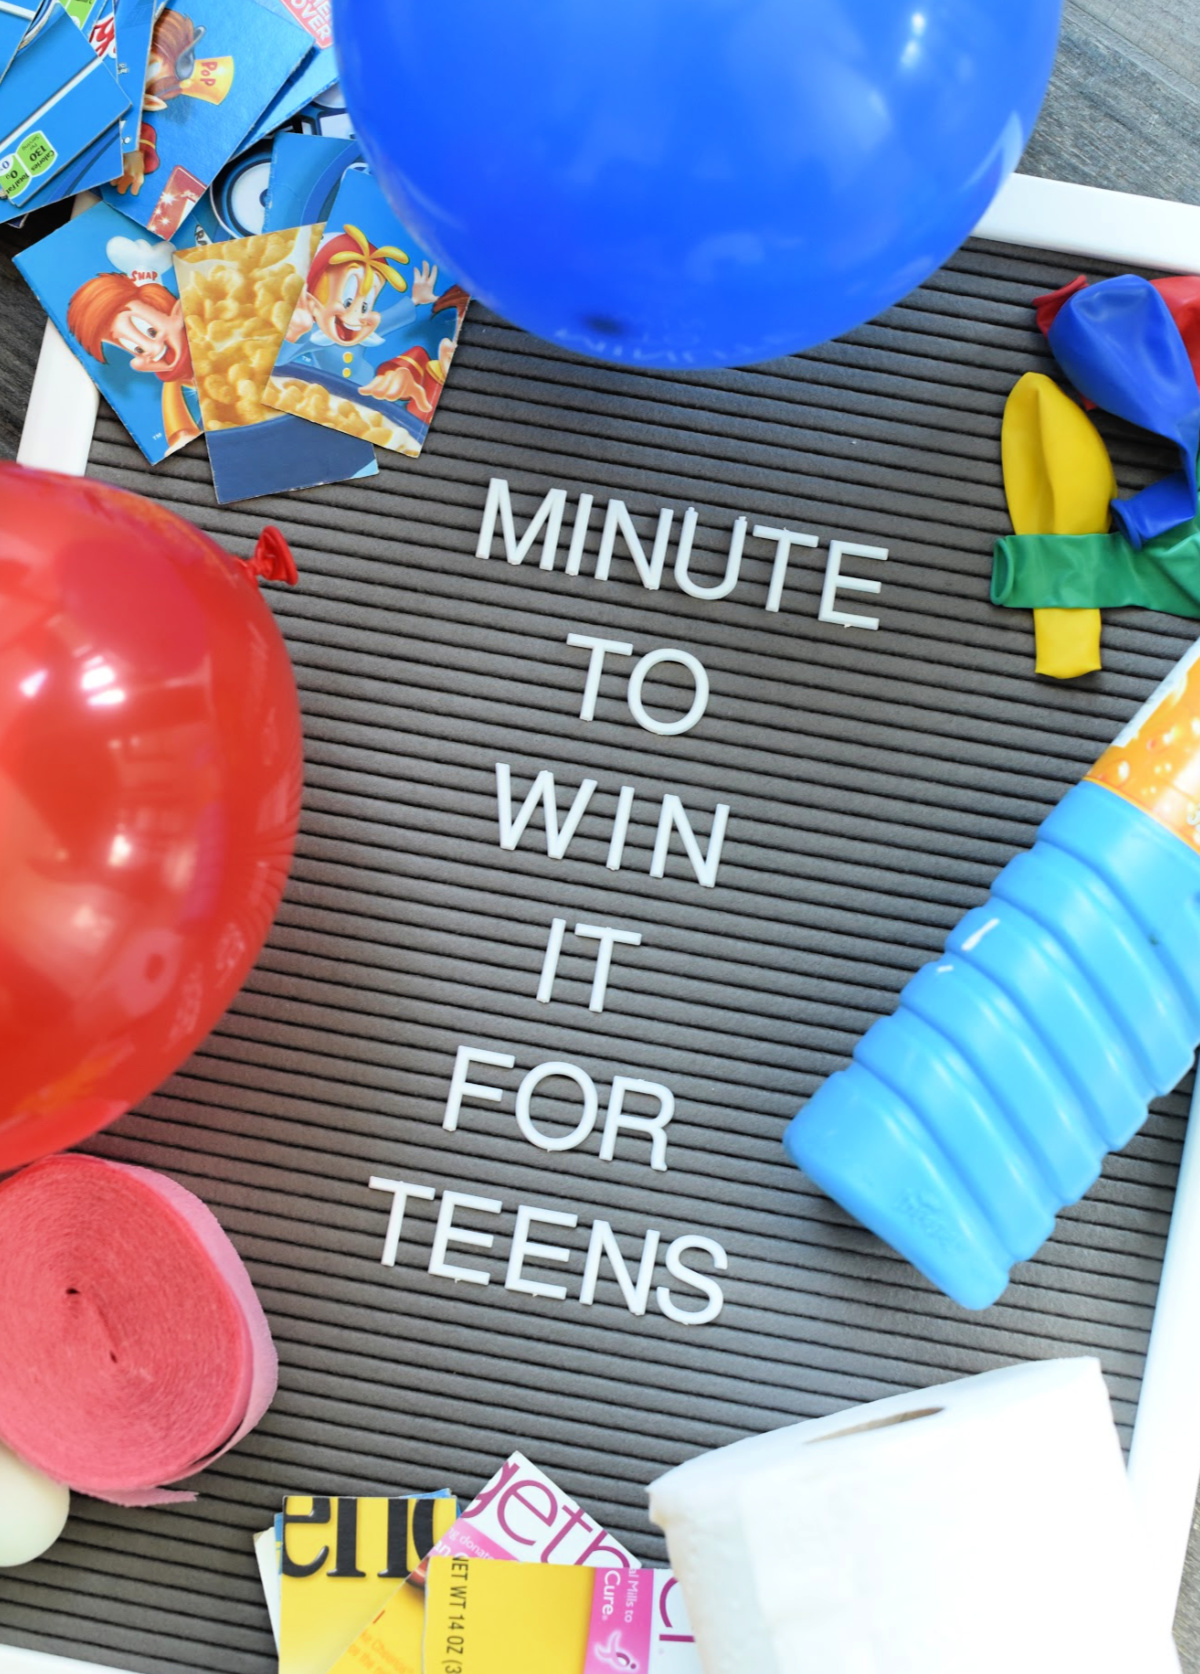 Minute to win it games for teens-These fun minute to win it games are great for teens, preteens, kids or even adults. They are easy to pull off and are creative and fun! #partygames #games #minutetowinit #birthdaygame #party